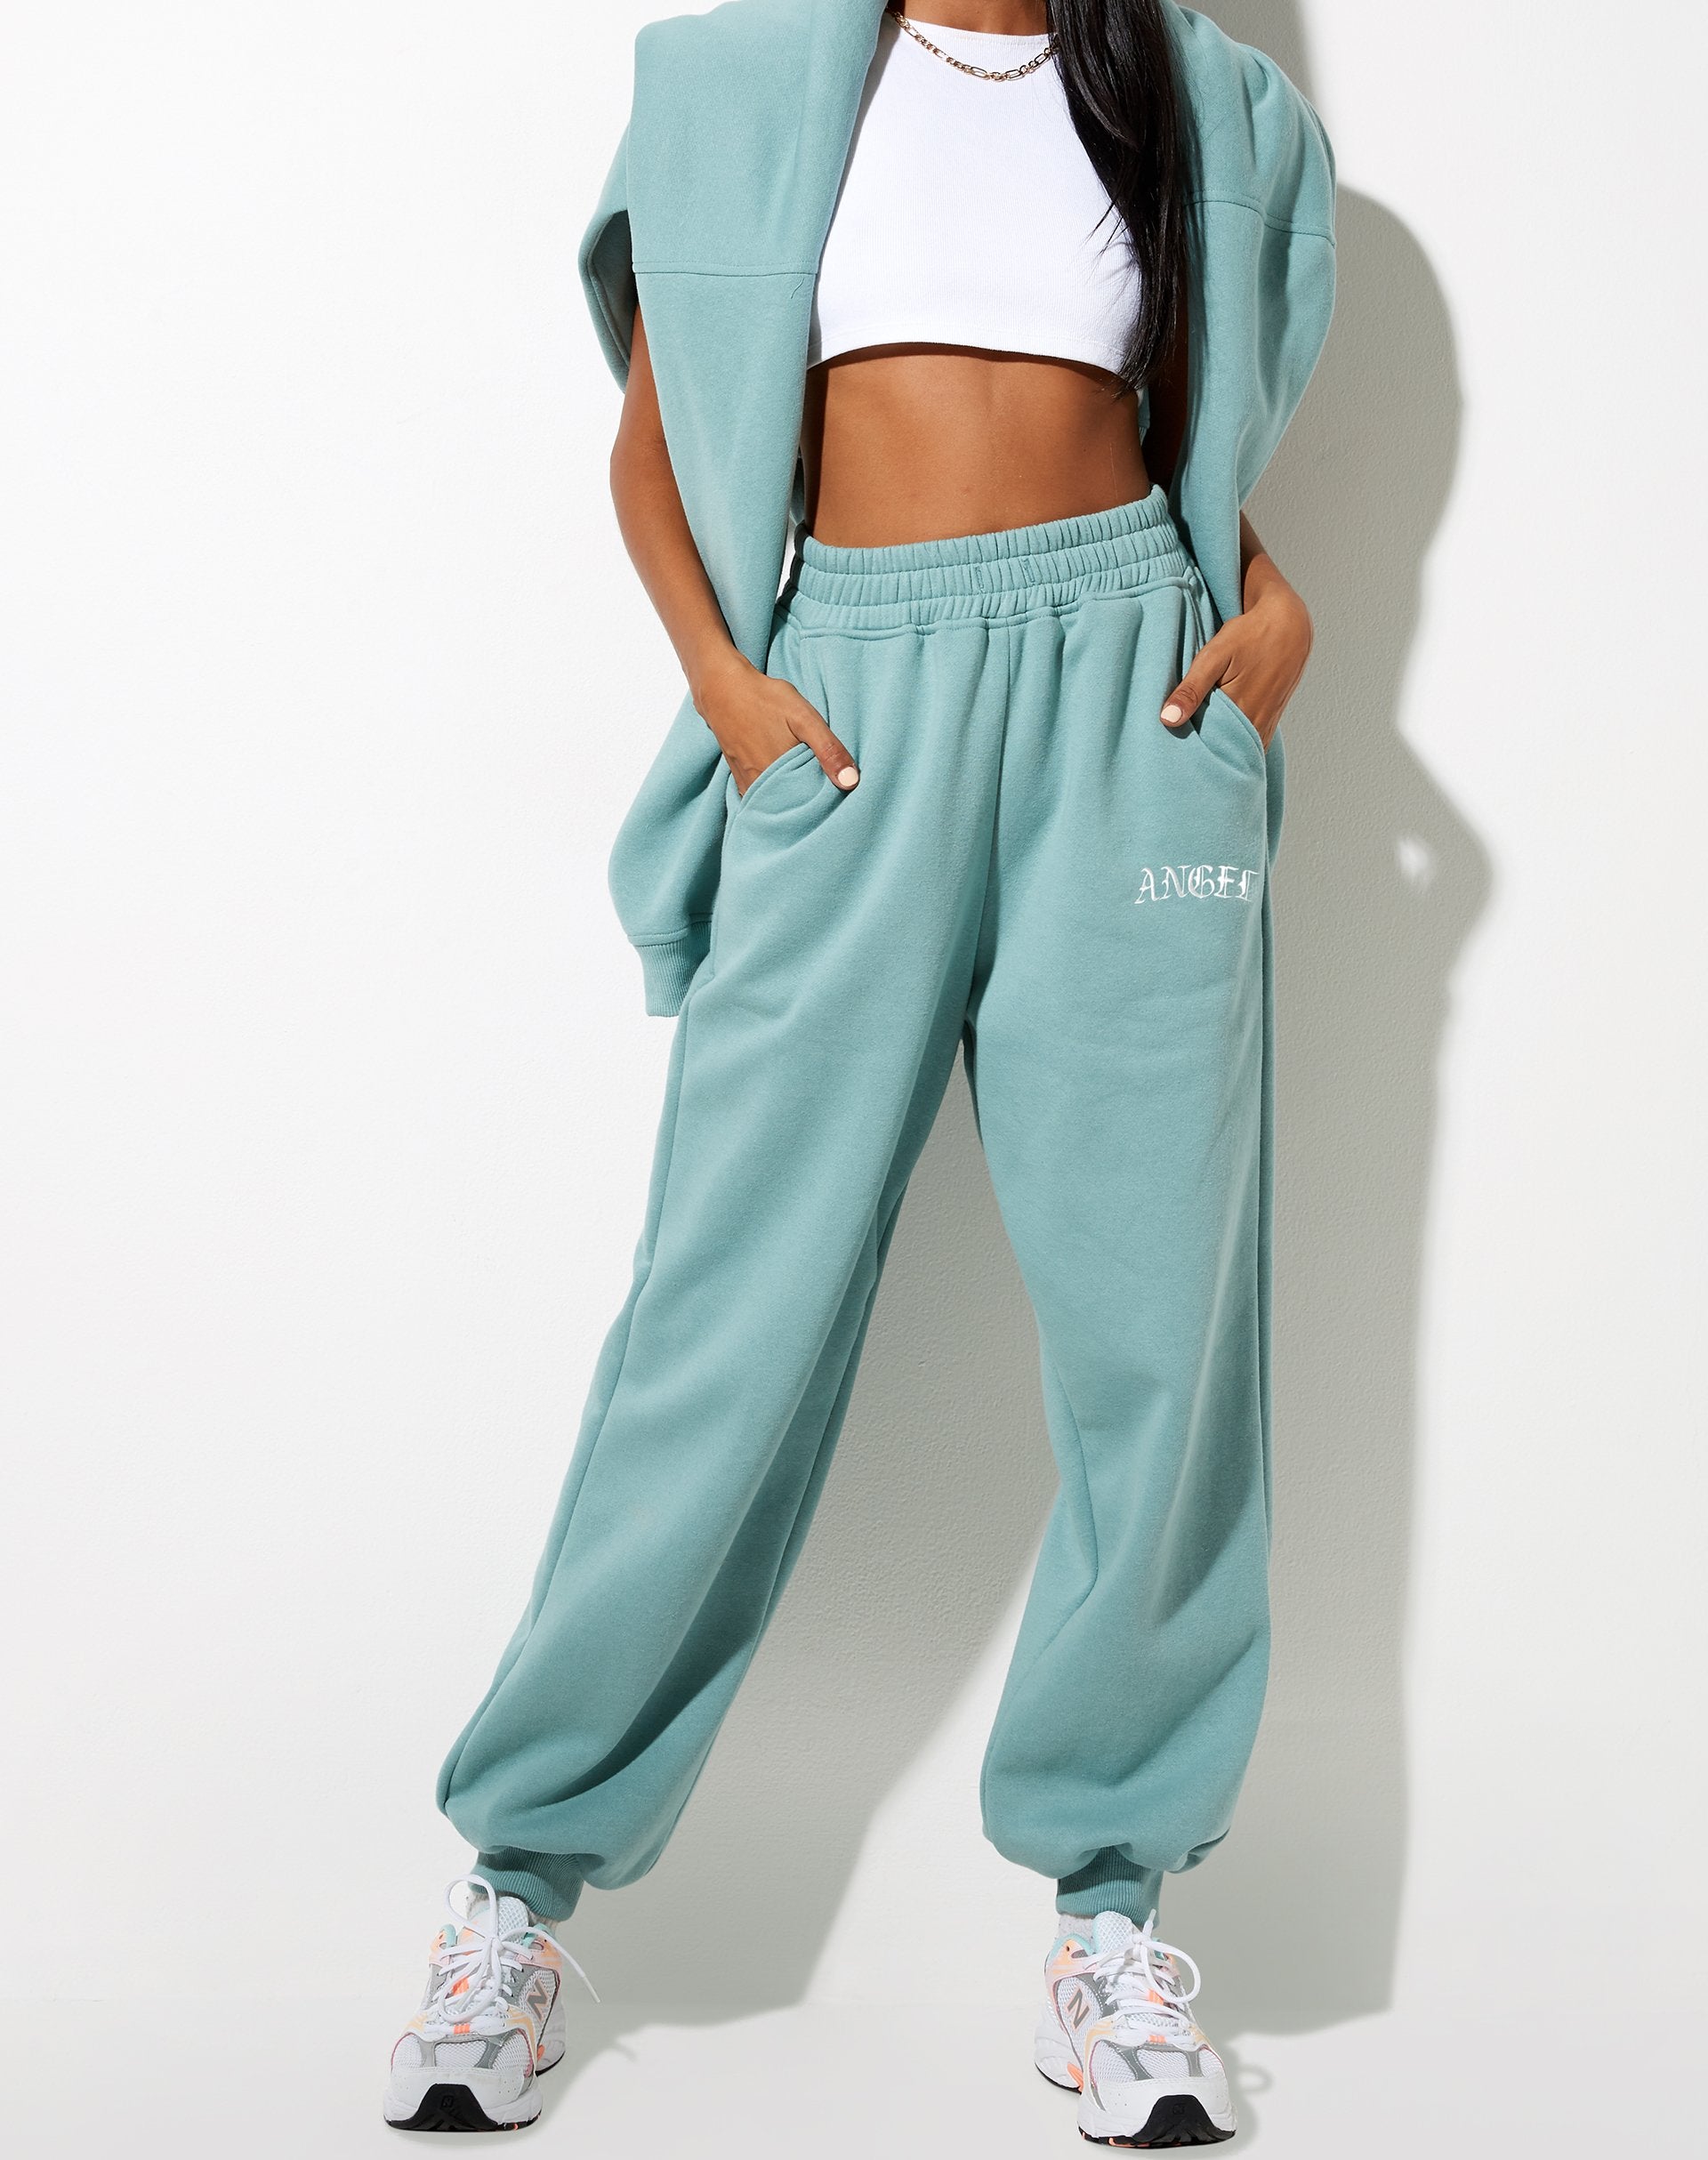 Image of Roider Jogger in Seafoam Angel Embro